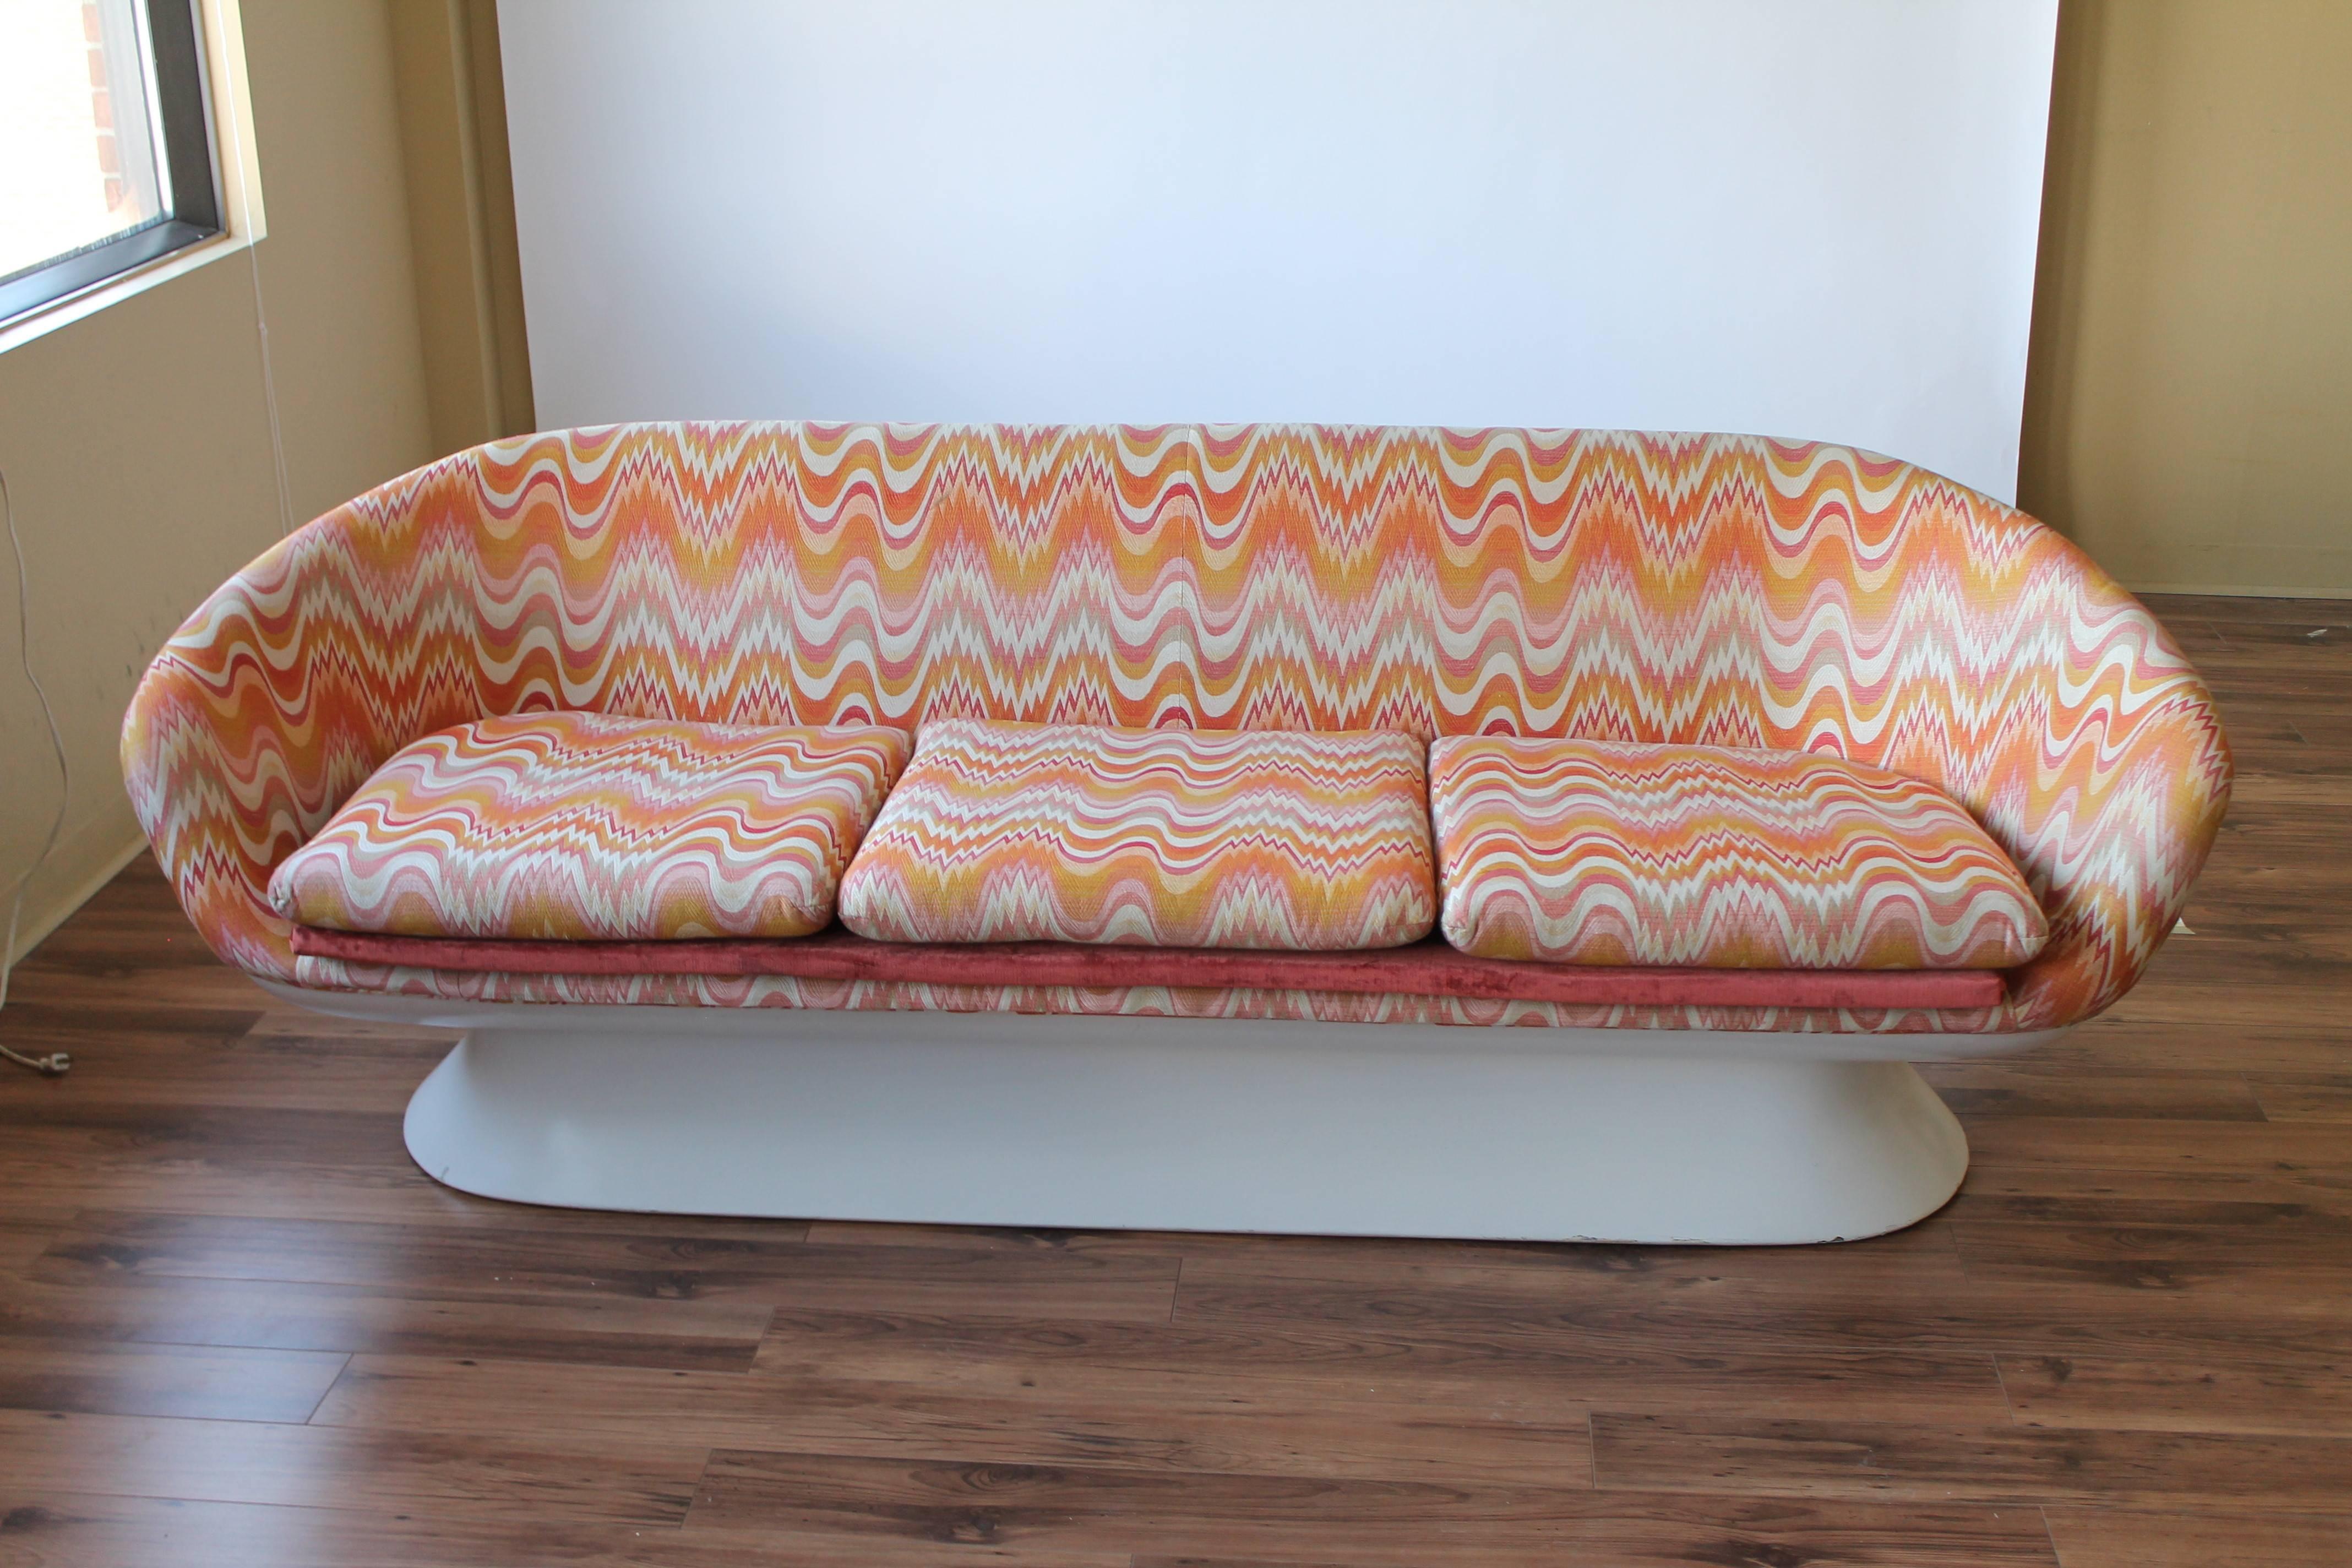 Ergonomicaly designed and very comfortable.

Base is made of enameled fiberglass.

Reupholstered  by previous owner  .

7 feet wide by 28.5 inches high .  